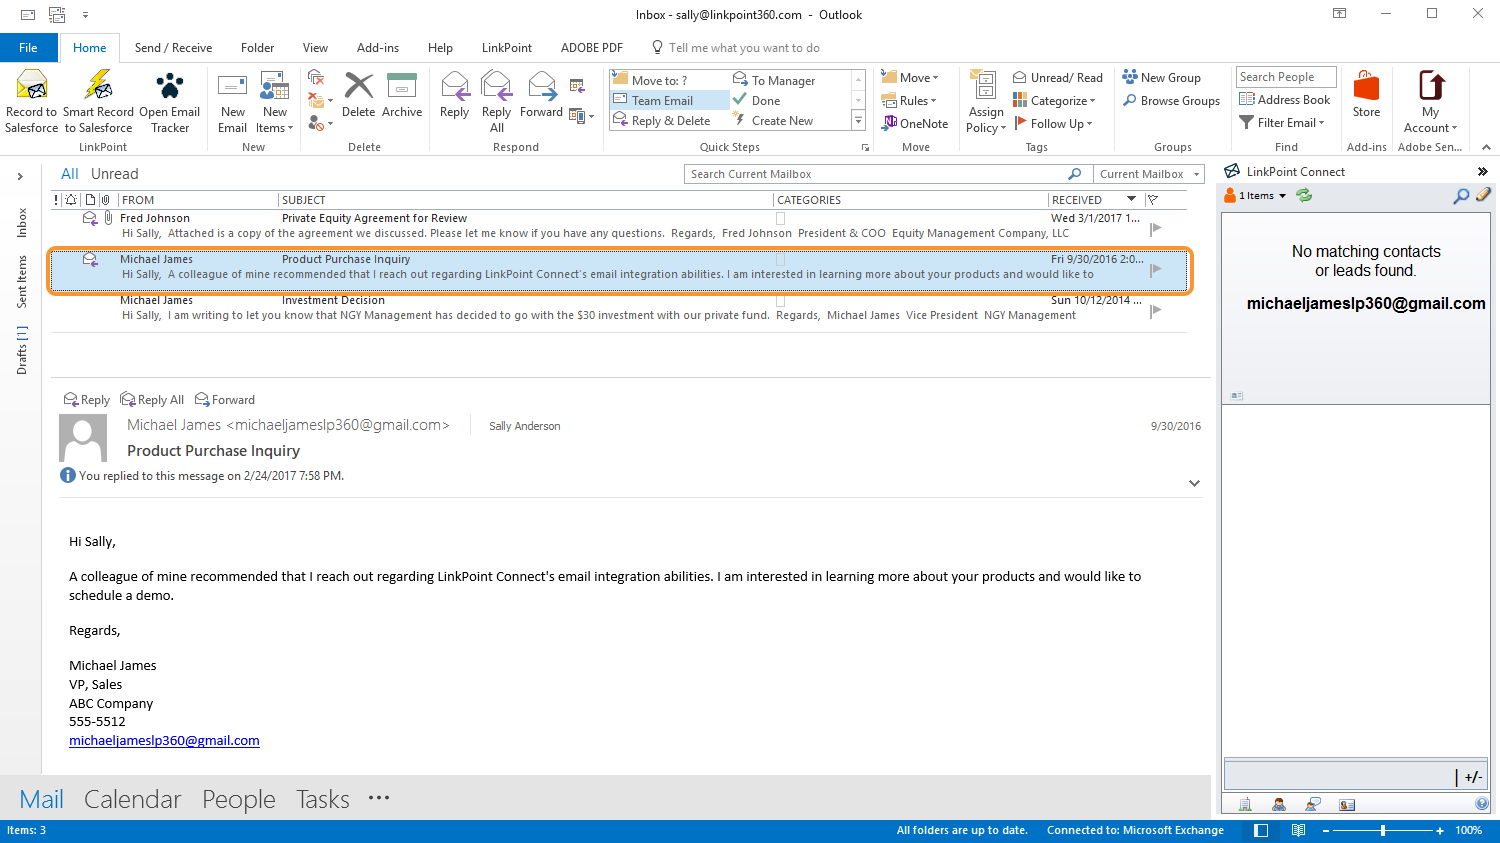 Creating Outlook Contacts from Email Signatures (Outlook + Salesforce), Knowledge Base